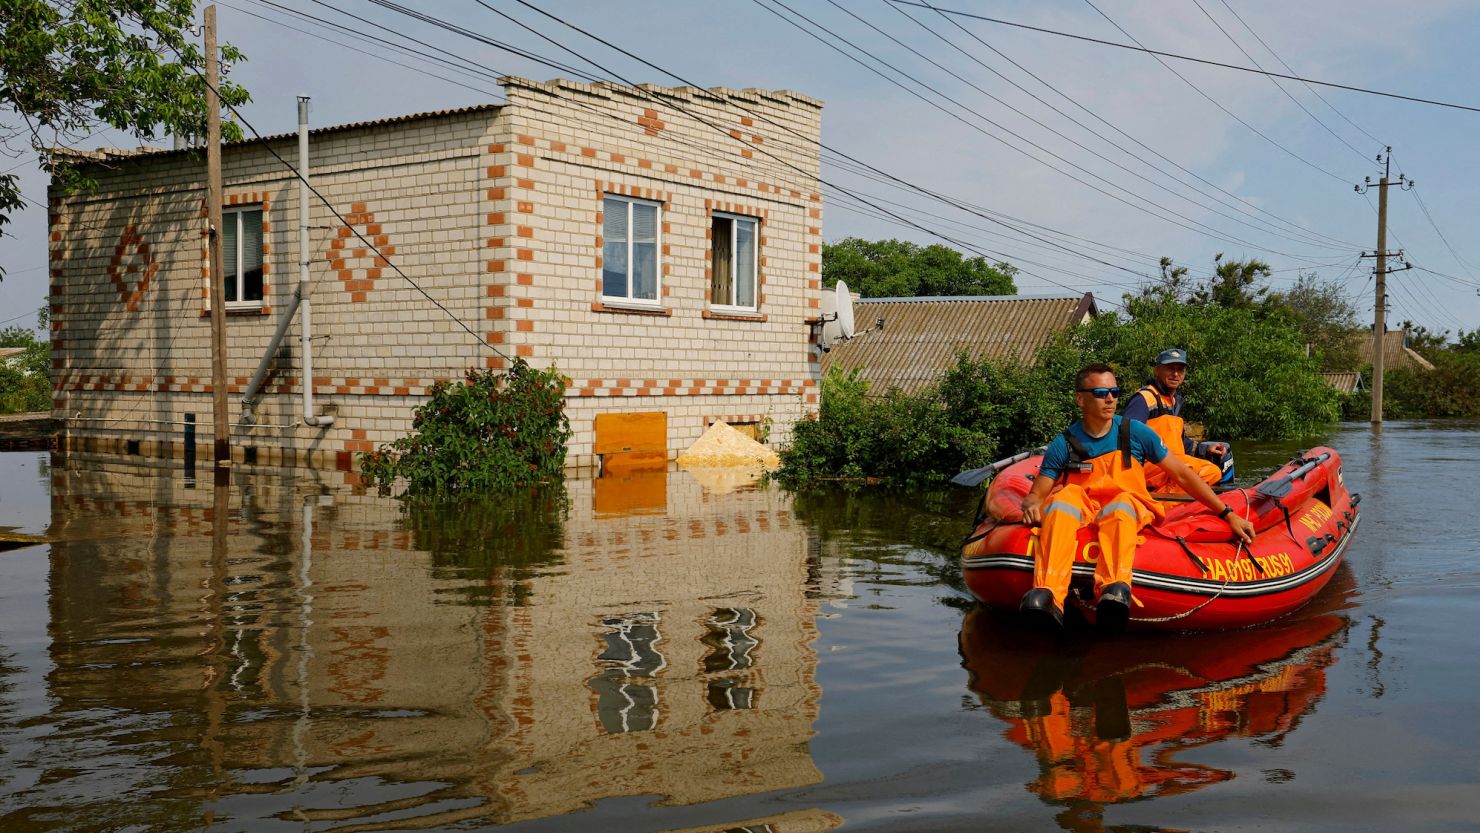 Members of Russia's emergencies ministry use an inflatable boat in a flooded area following the collapse of the Kakhovka dam on June 8.